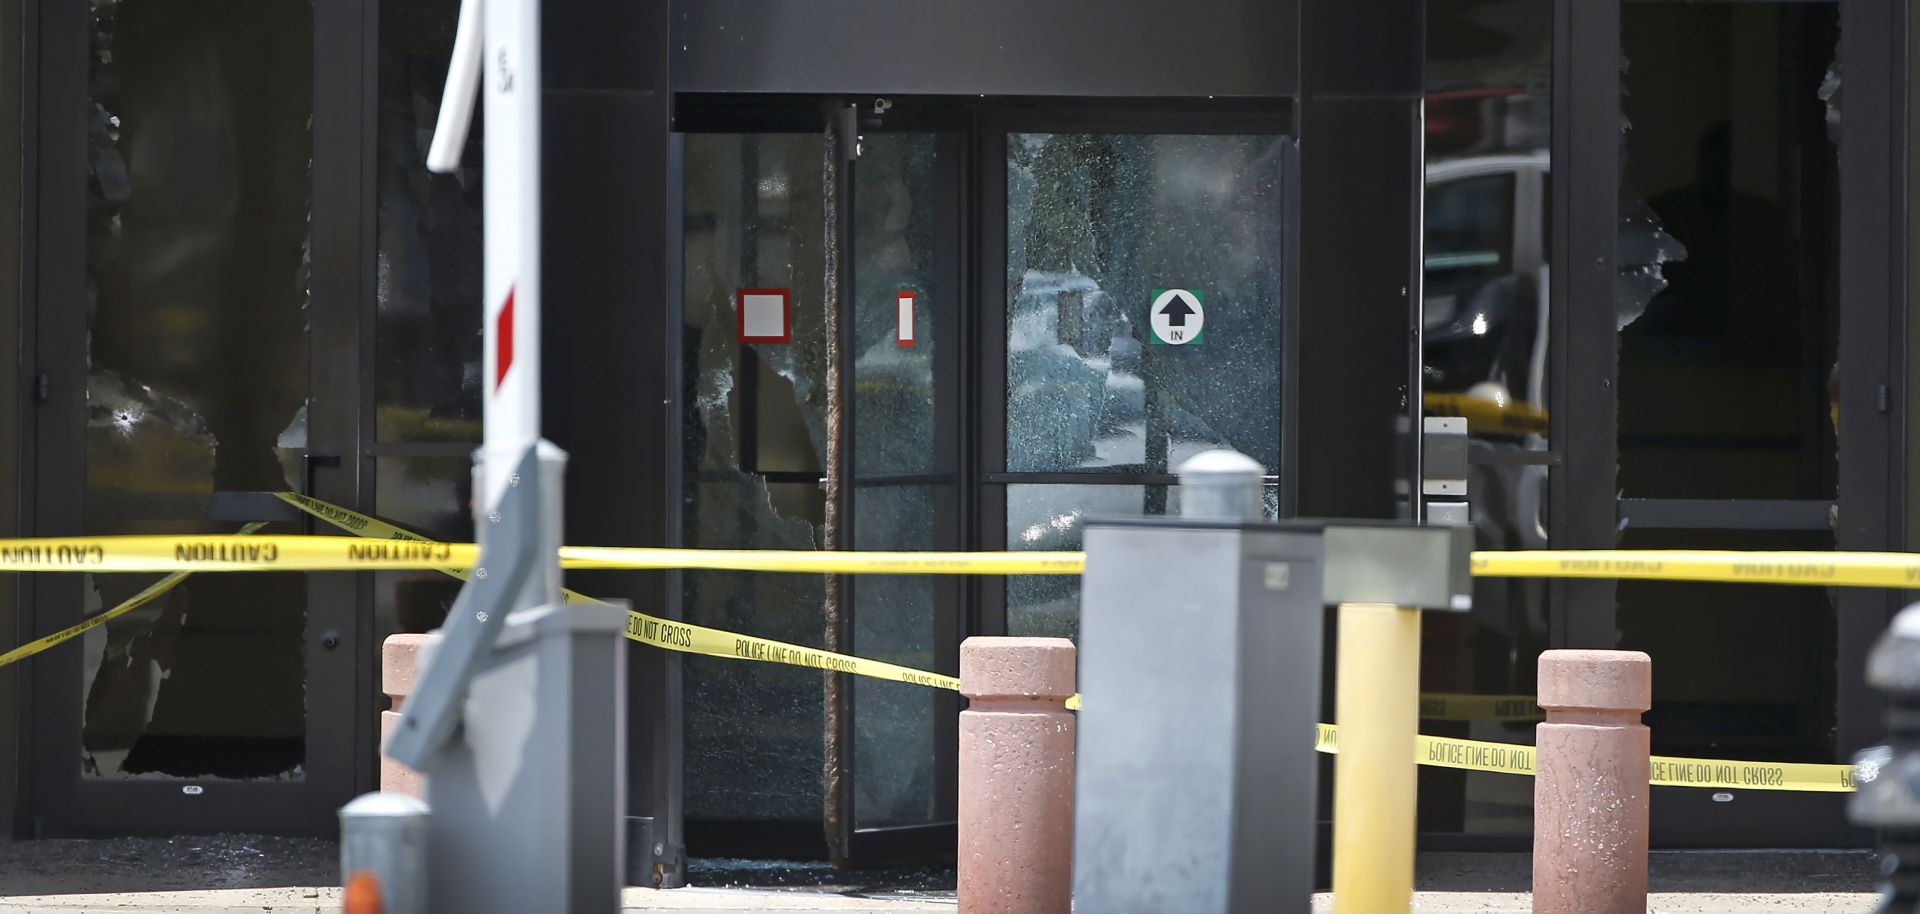 Shattered doors at the Earle Cabell Federal Building in Dallas, Texas, show evidence of a shooting committed by a lone gunman on June 17, 2019. The attacker was killed by police.